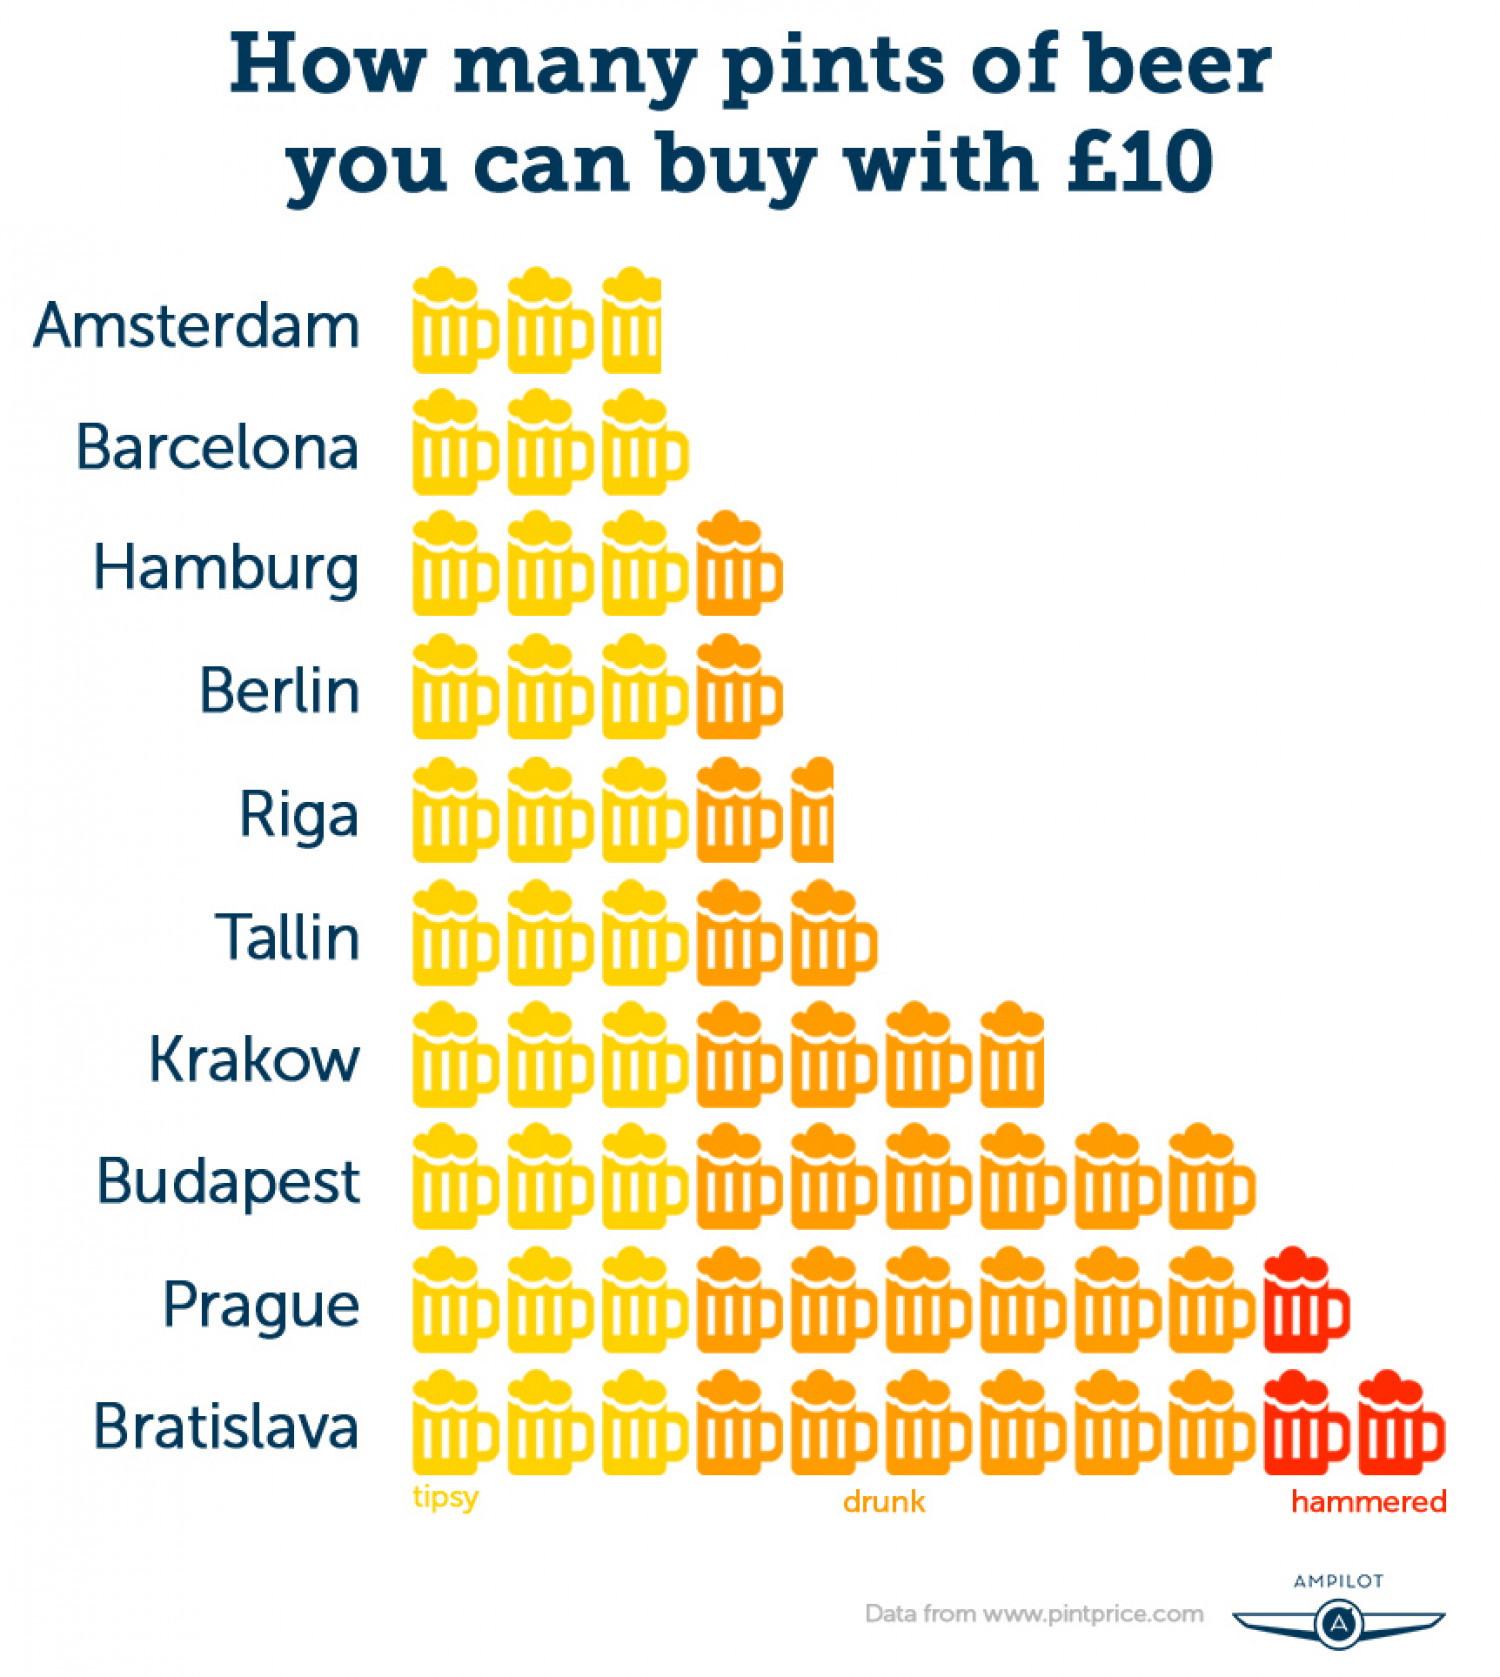 how many beers you can-buy with 10 gbp in europe